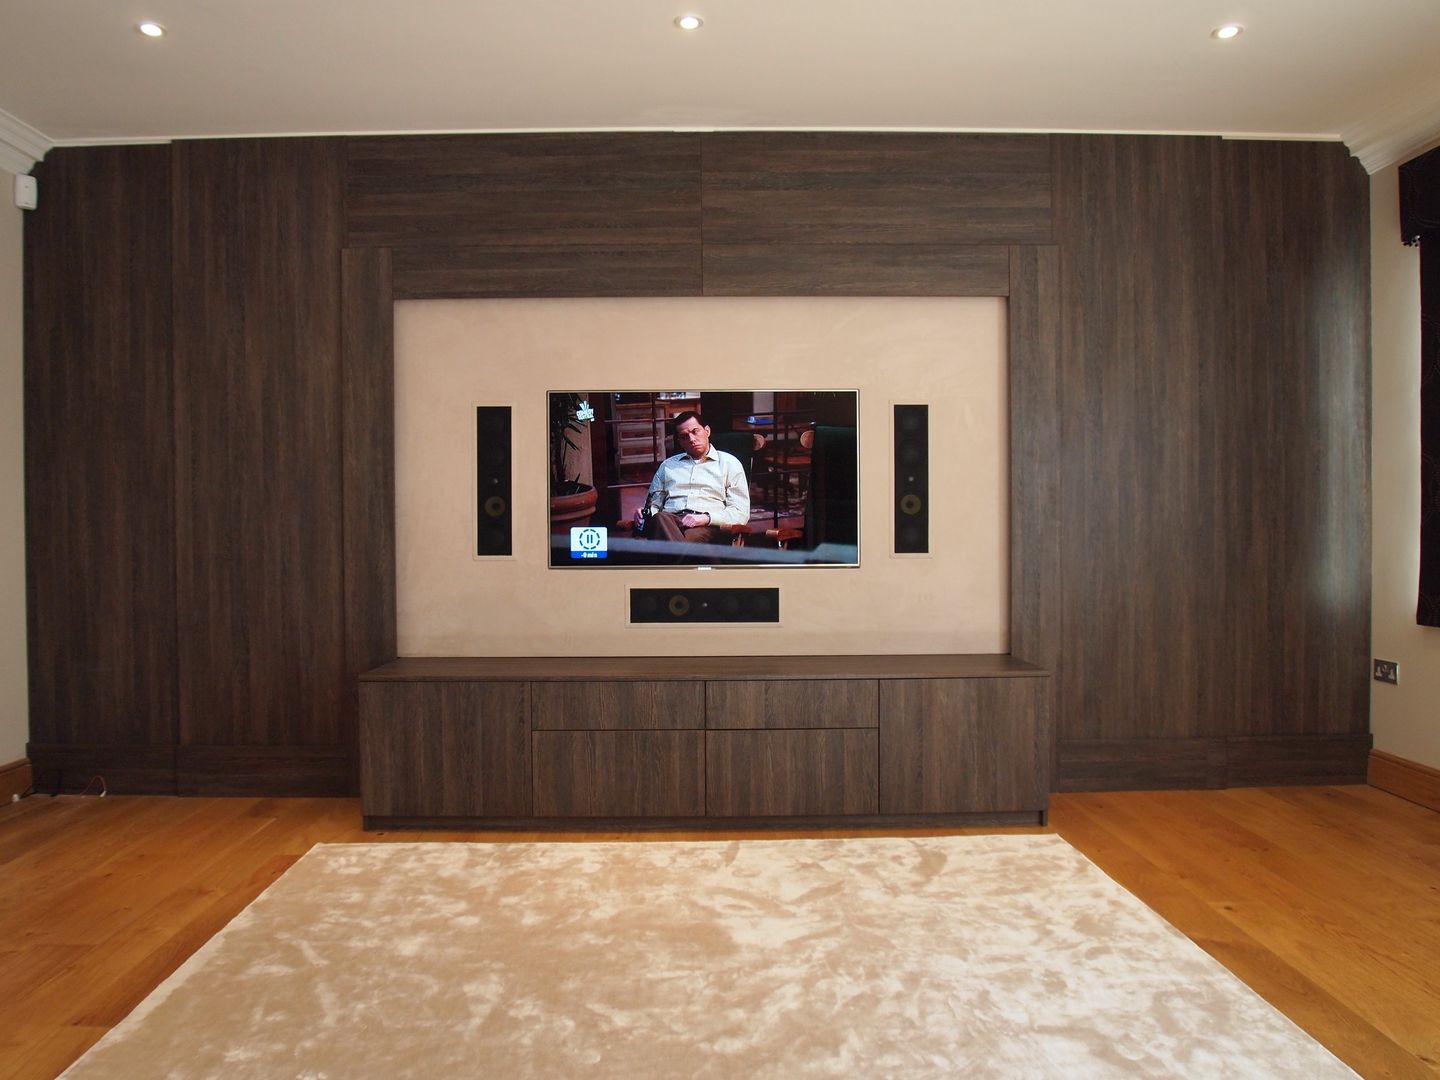 Dual purpose audio visual media unit with concealed 9 feet cinema screen and wood panelled walls. Designer Vision and Sound: Bespoke Cabinet Making ห้องสันทนาการ เฟอร์นิเจอร์